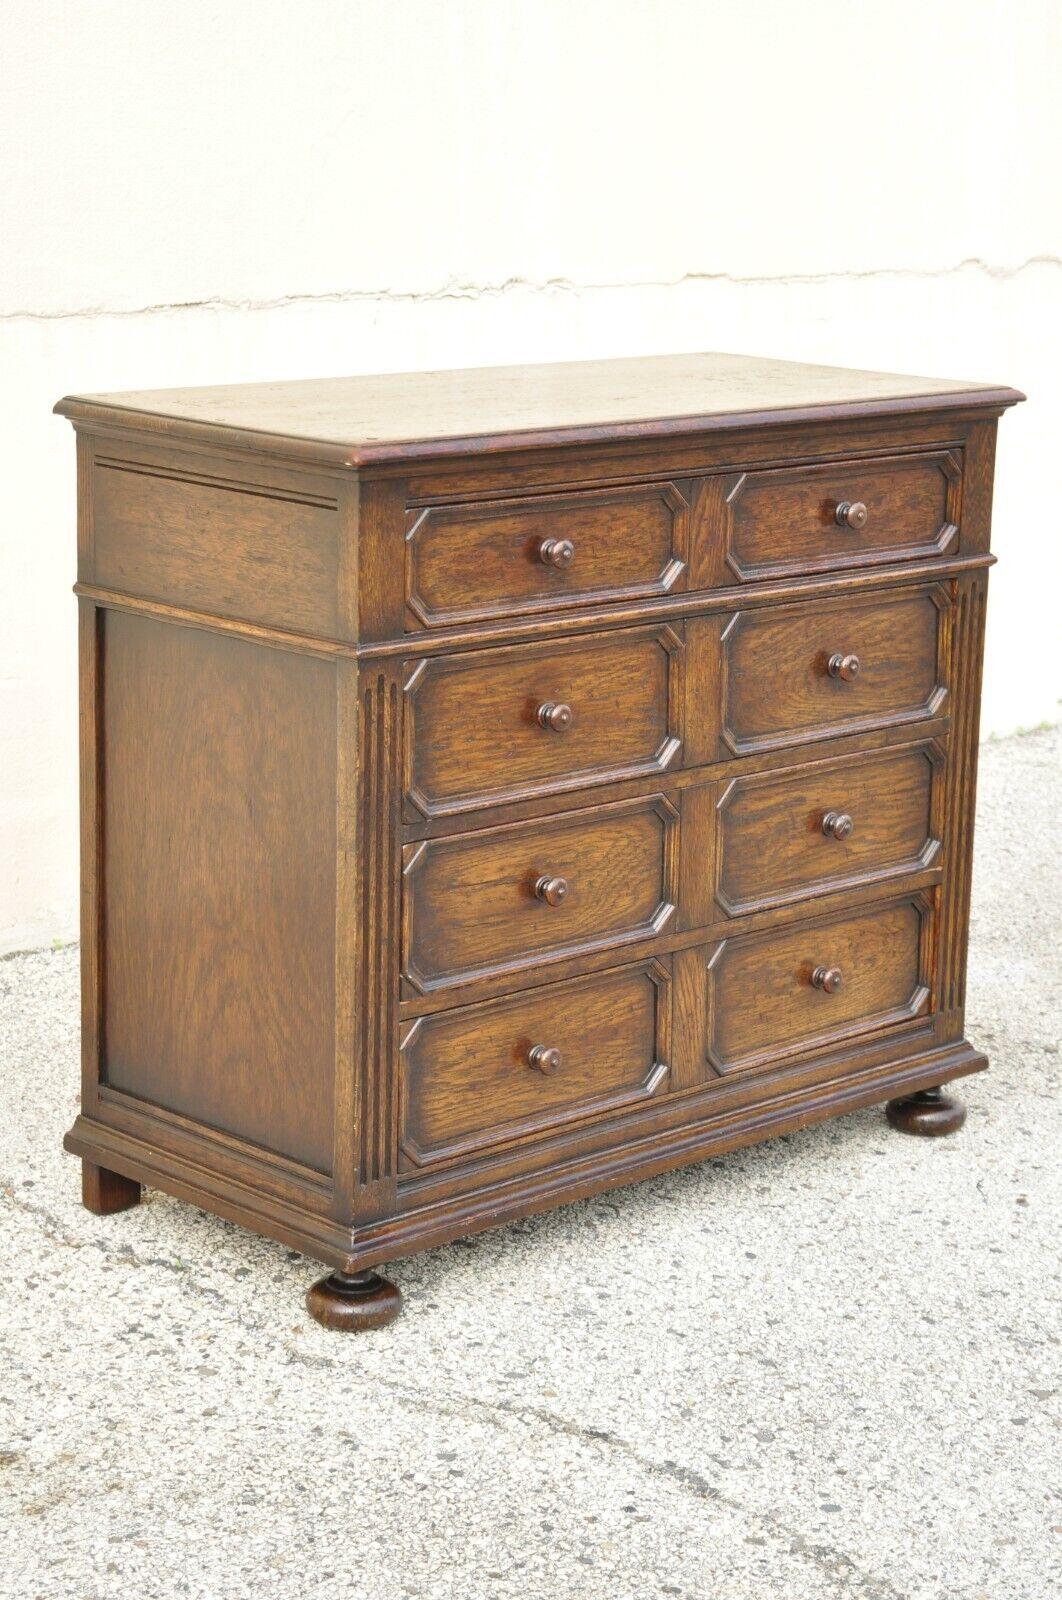 Antique Oak Jacobean style carved wood chest of drawers low chest dresser. Item features bun feet, solid wood construction, beautiful wood grain, distressed finish, 4 dovetailed drawers, very nice antique item, great style and form, matching dresser